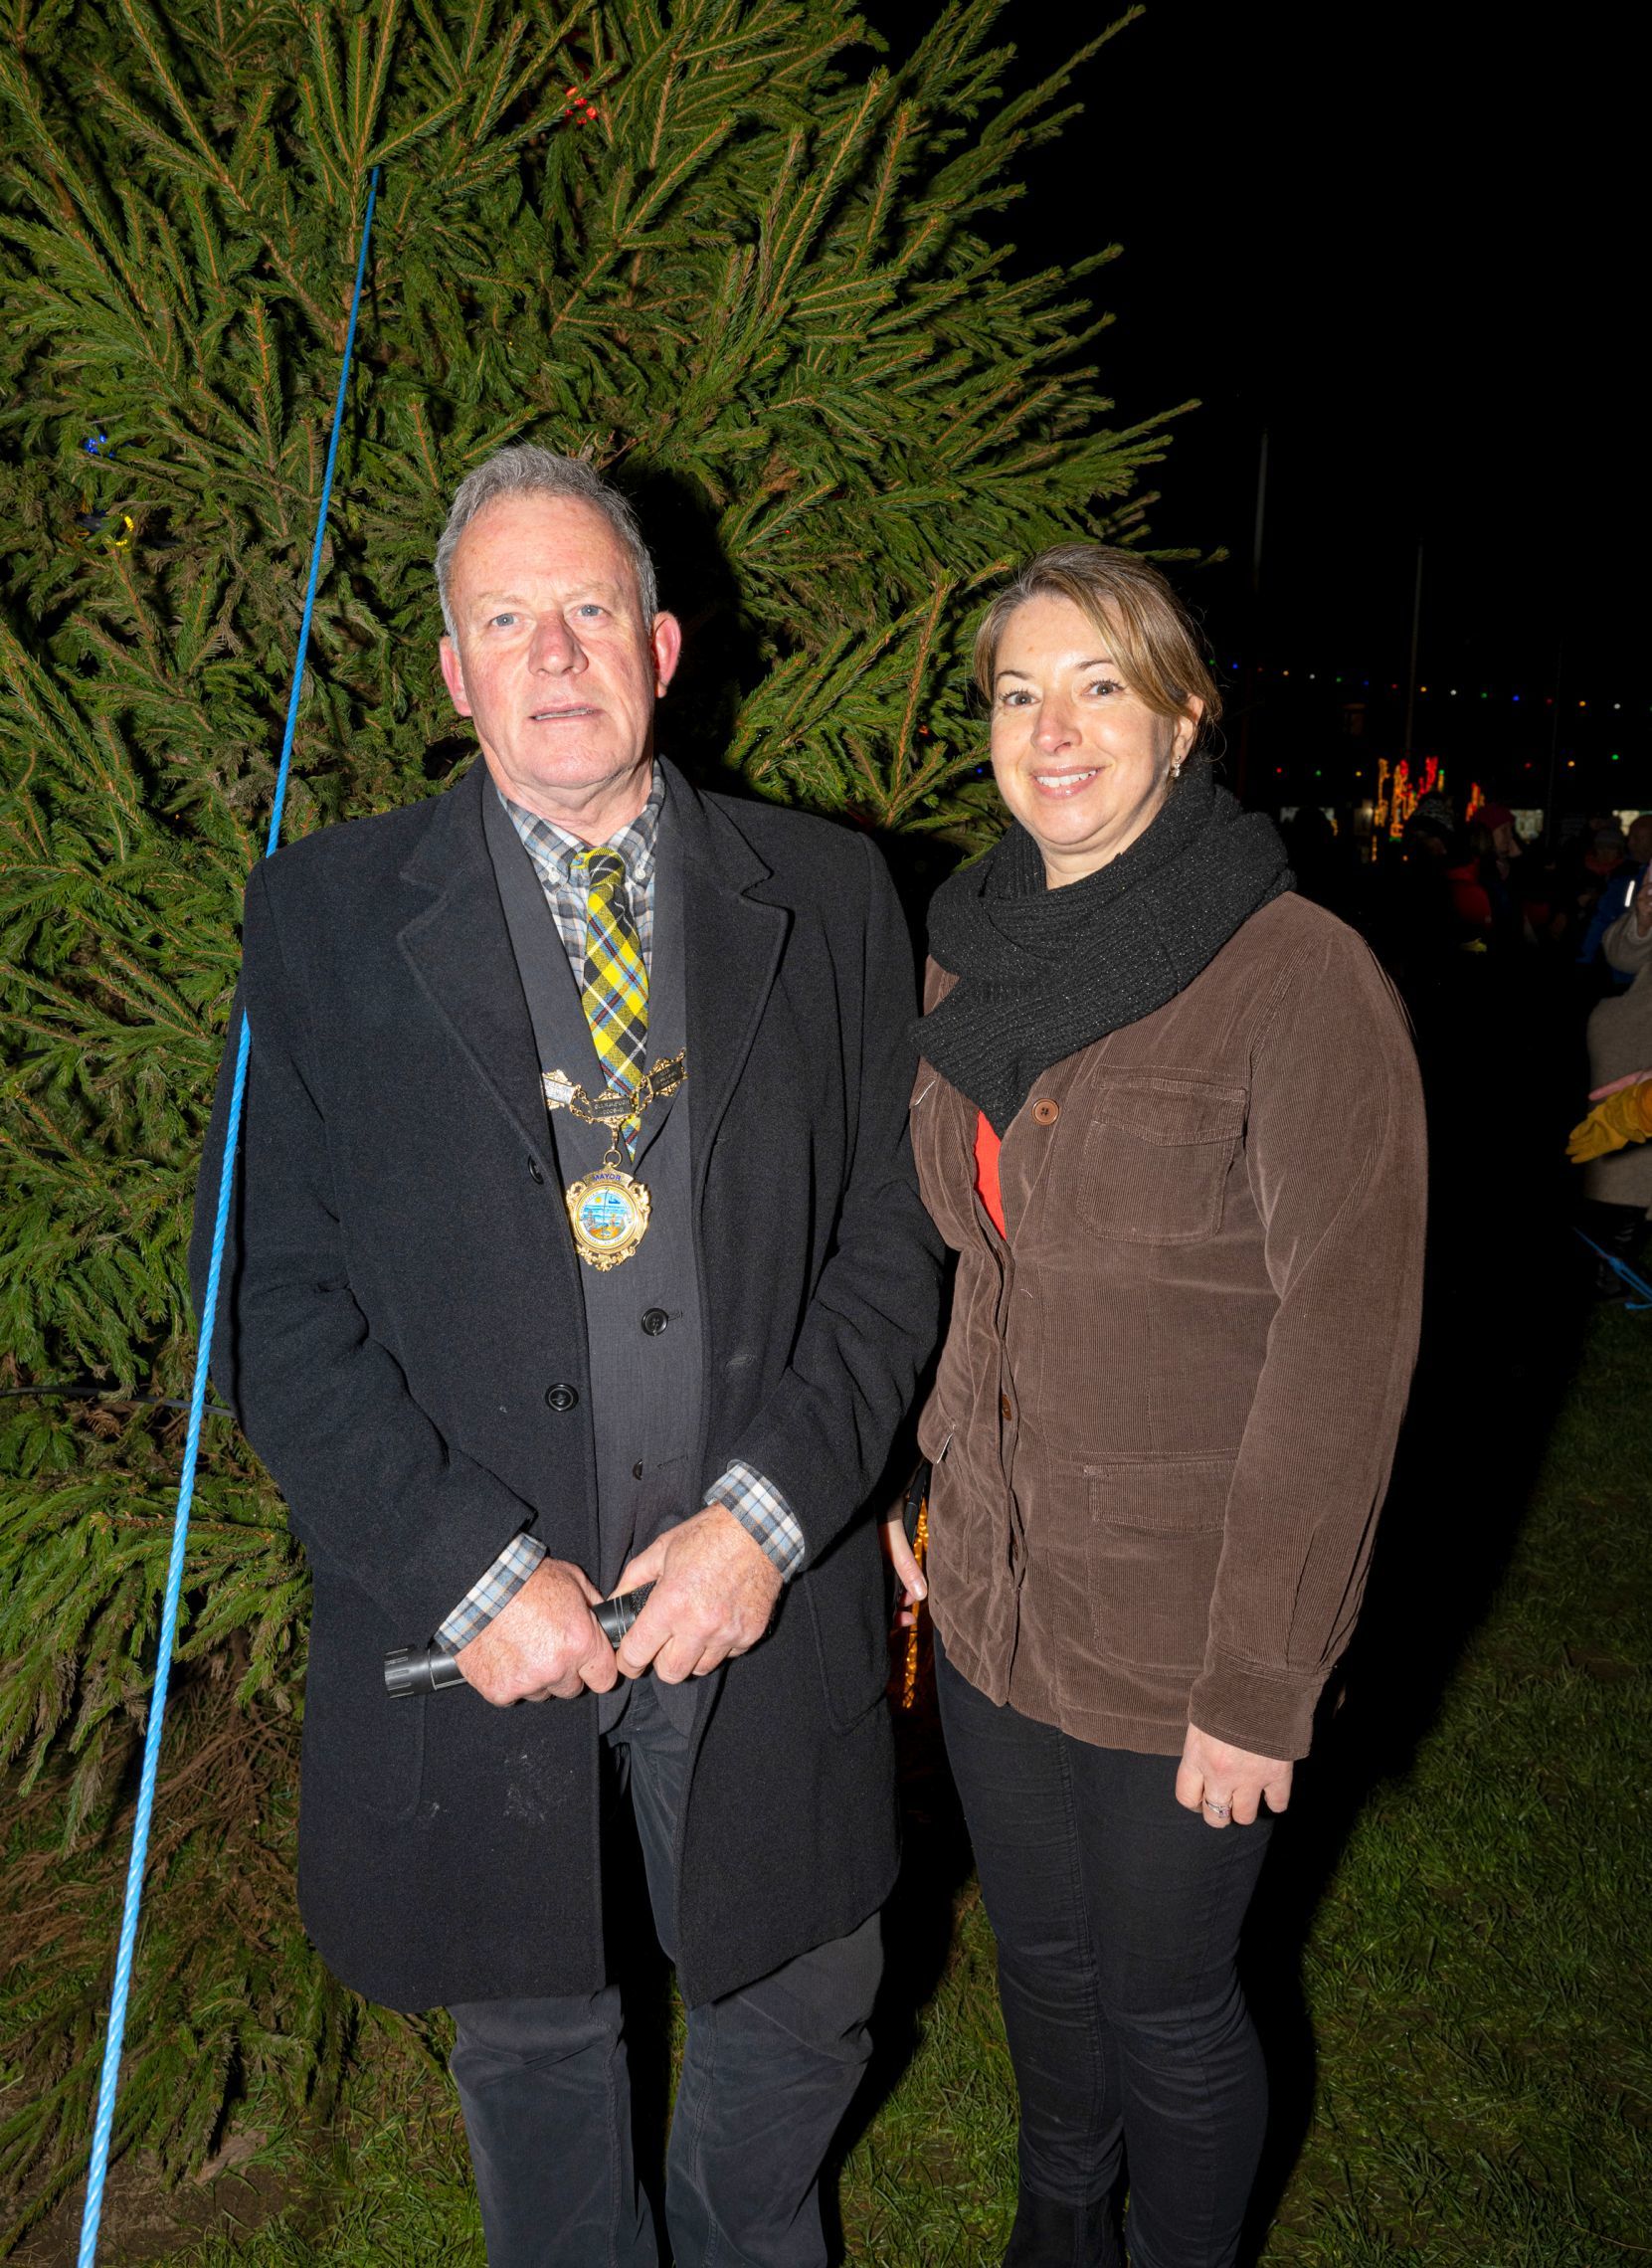 Mayor Mike Toy in front of the Christmas tree with Kirsty Sjoholm Picture: Kathy White